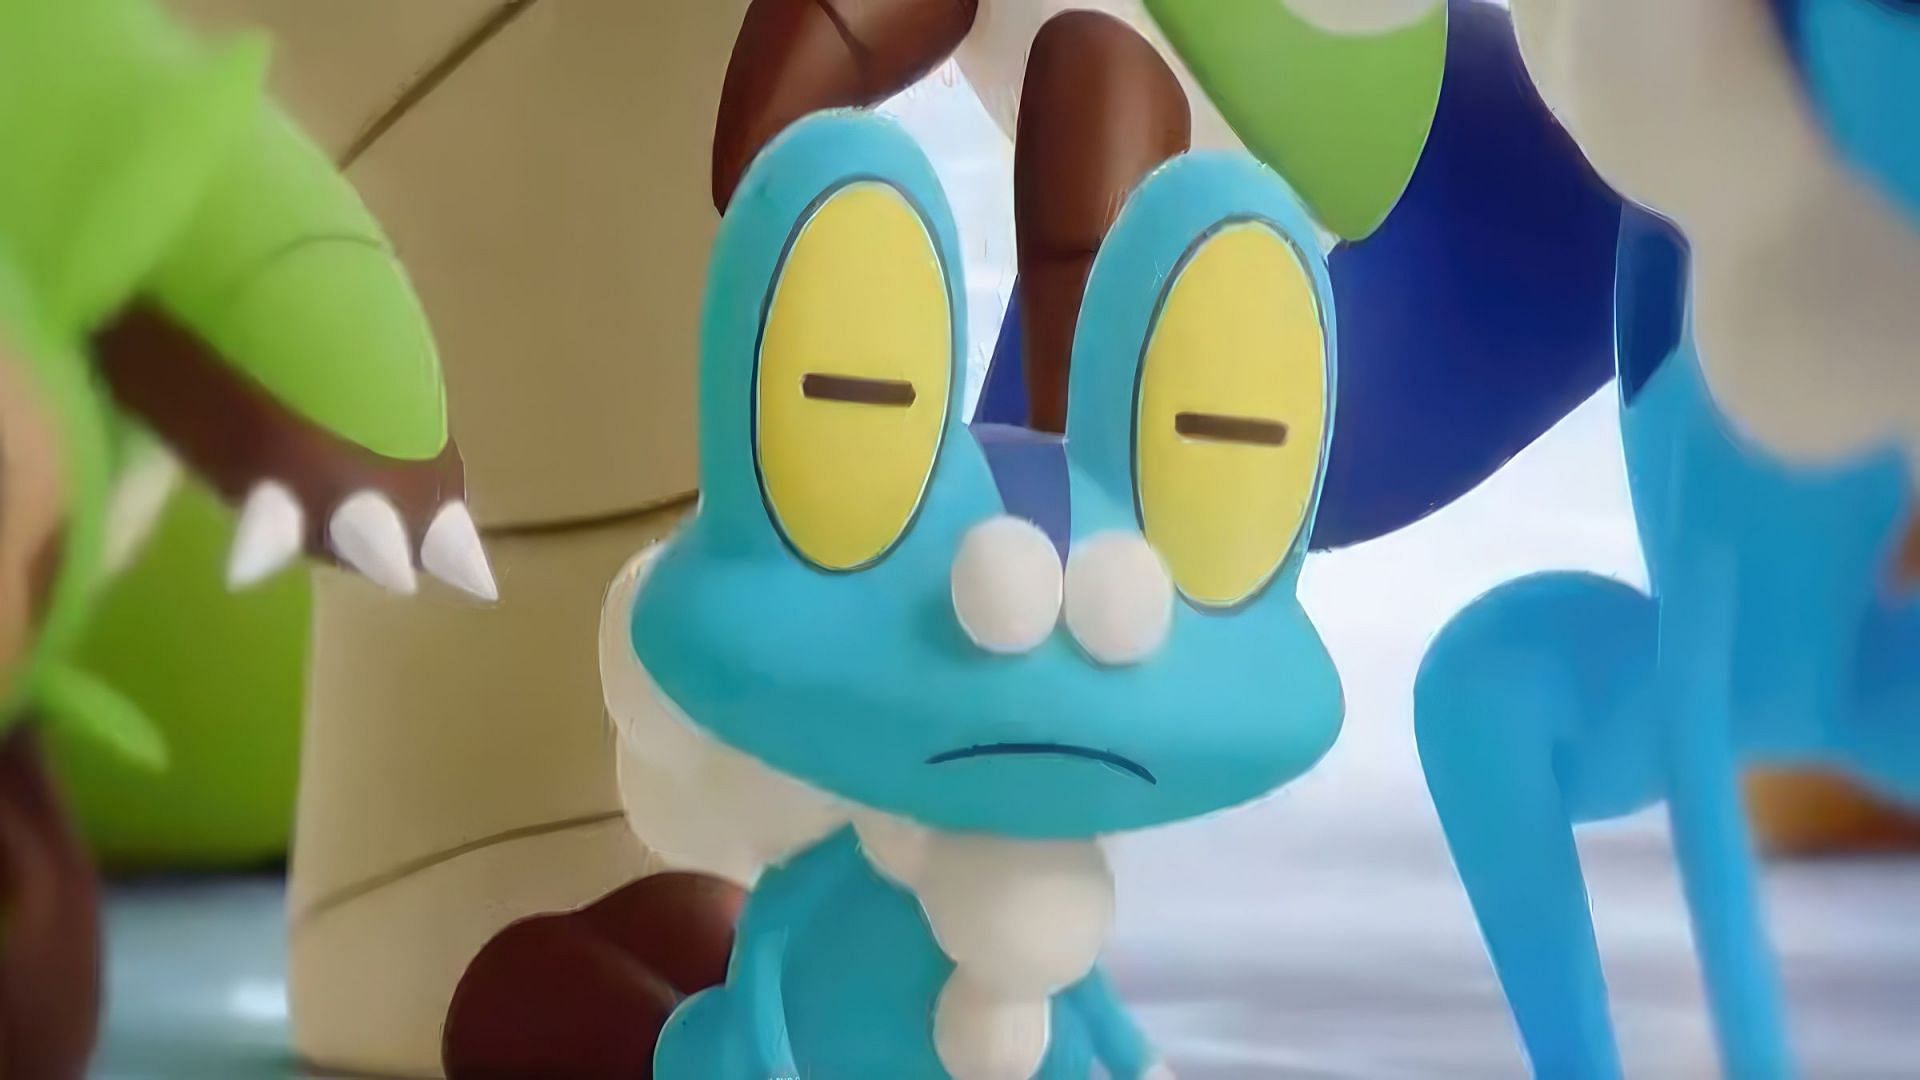 Froakie as seen in the anime (Image via The Pokemon Company)